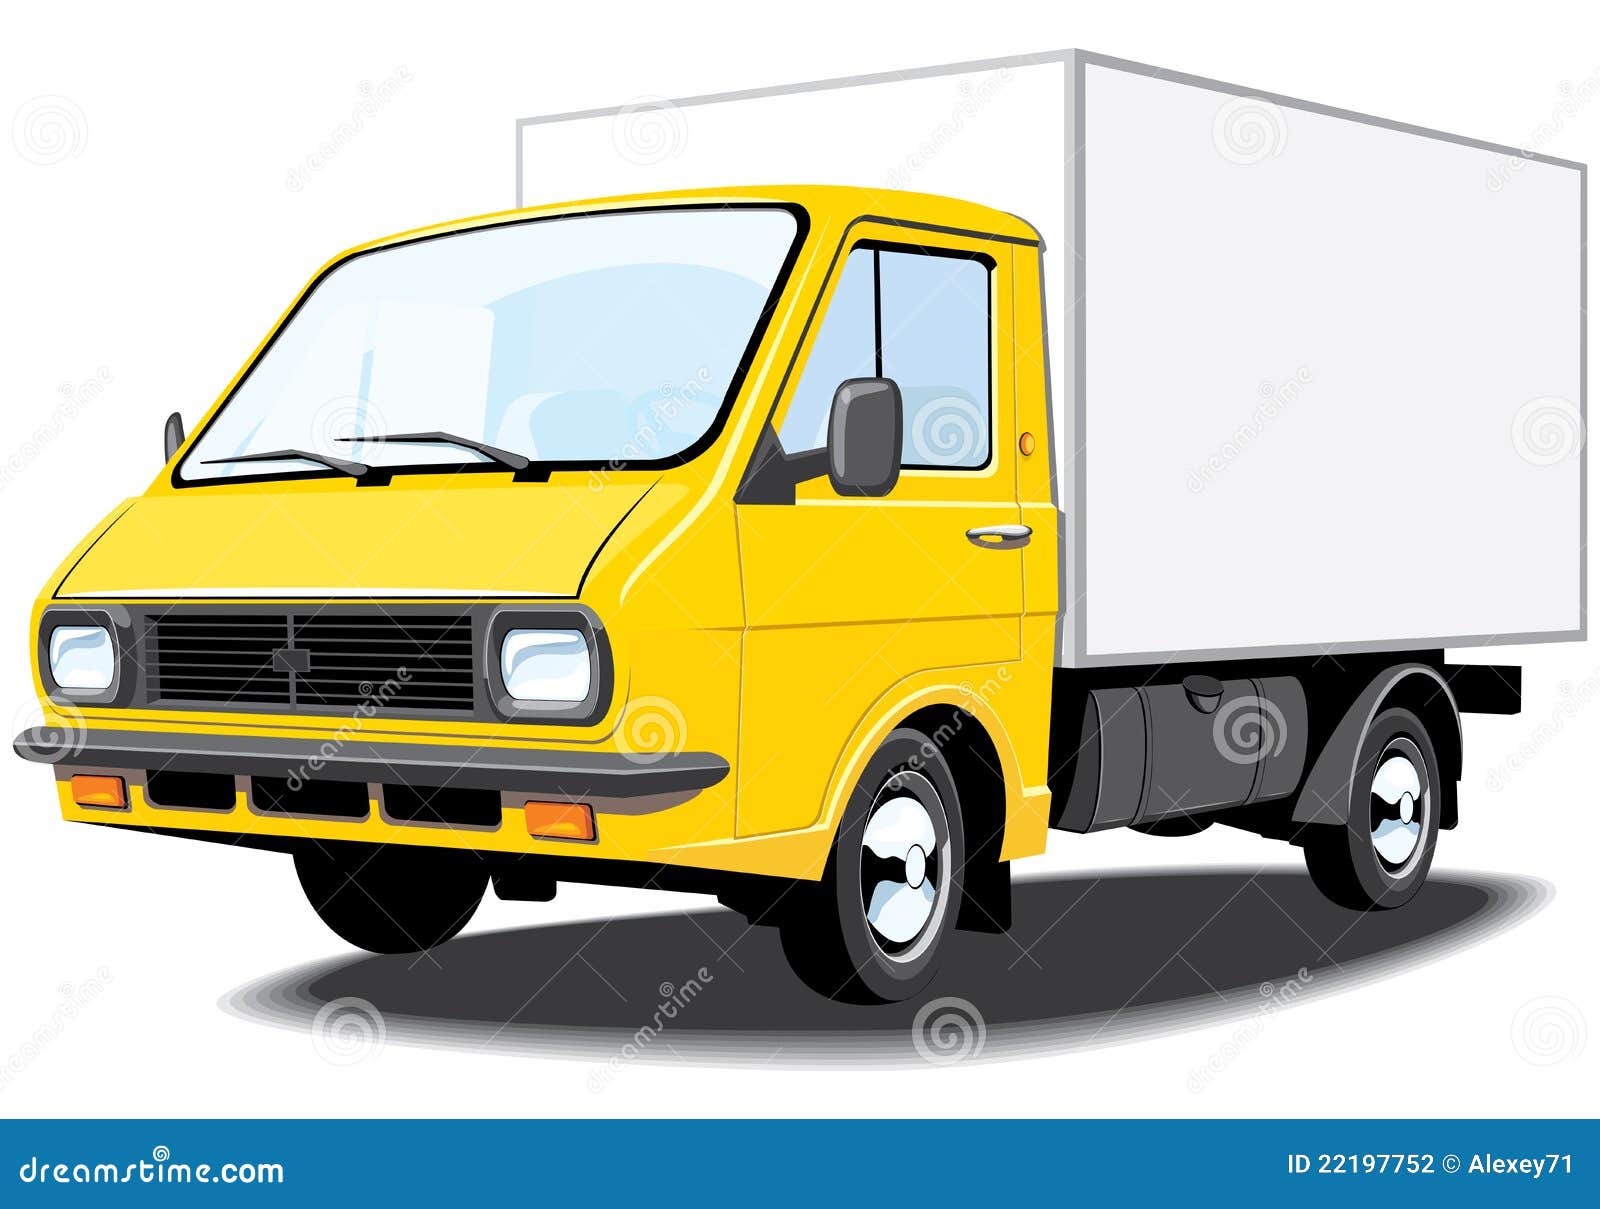 delivery truck clipart - photo #50